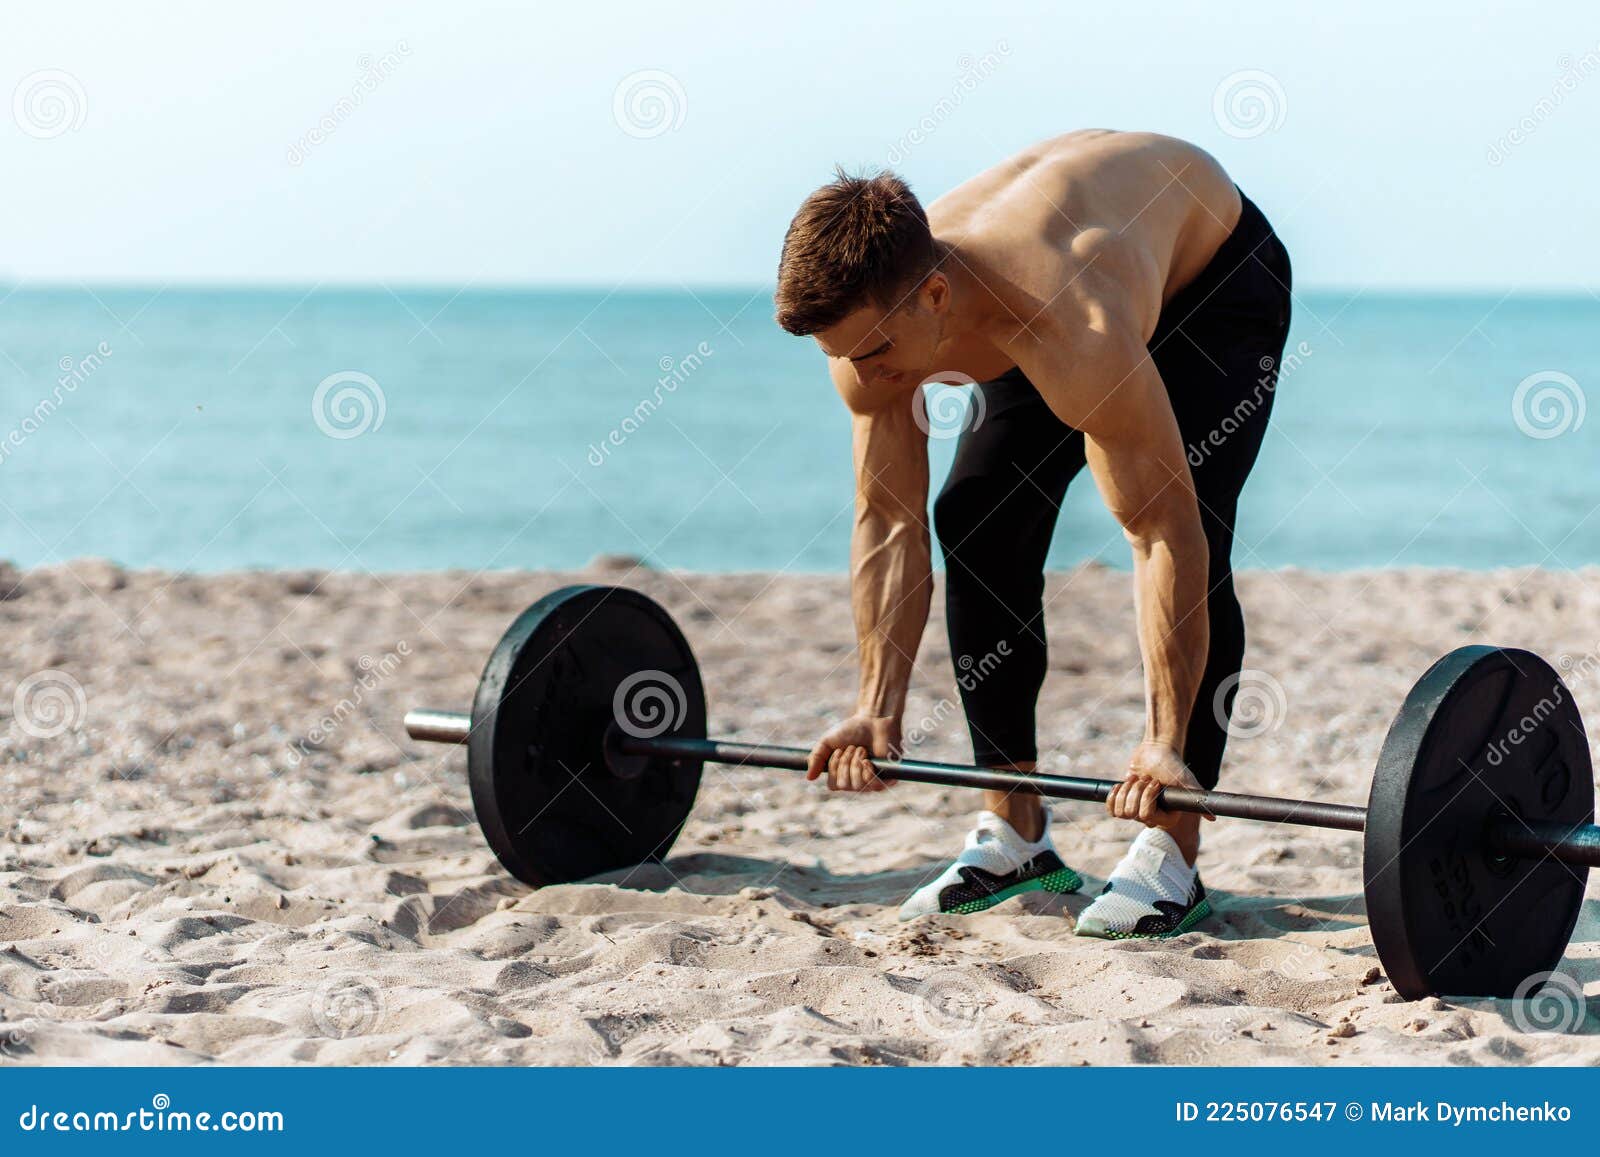 A Strong Girl With Big Muscular Arms On A Beach Stock Photo, Picture and  Royalty Free Image. Image 18043673.